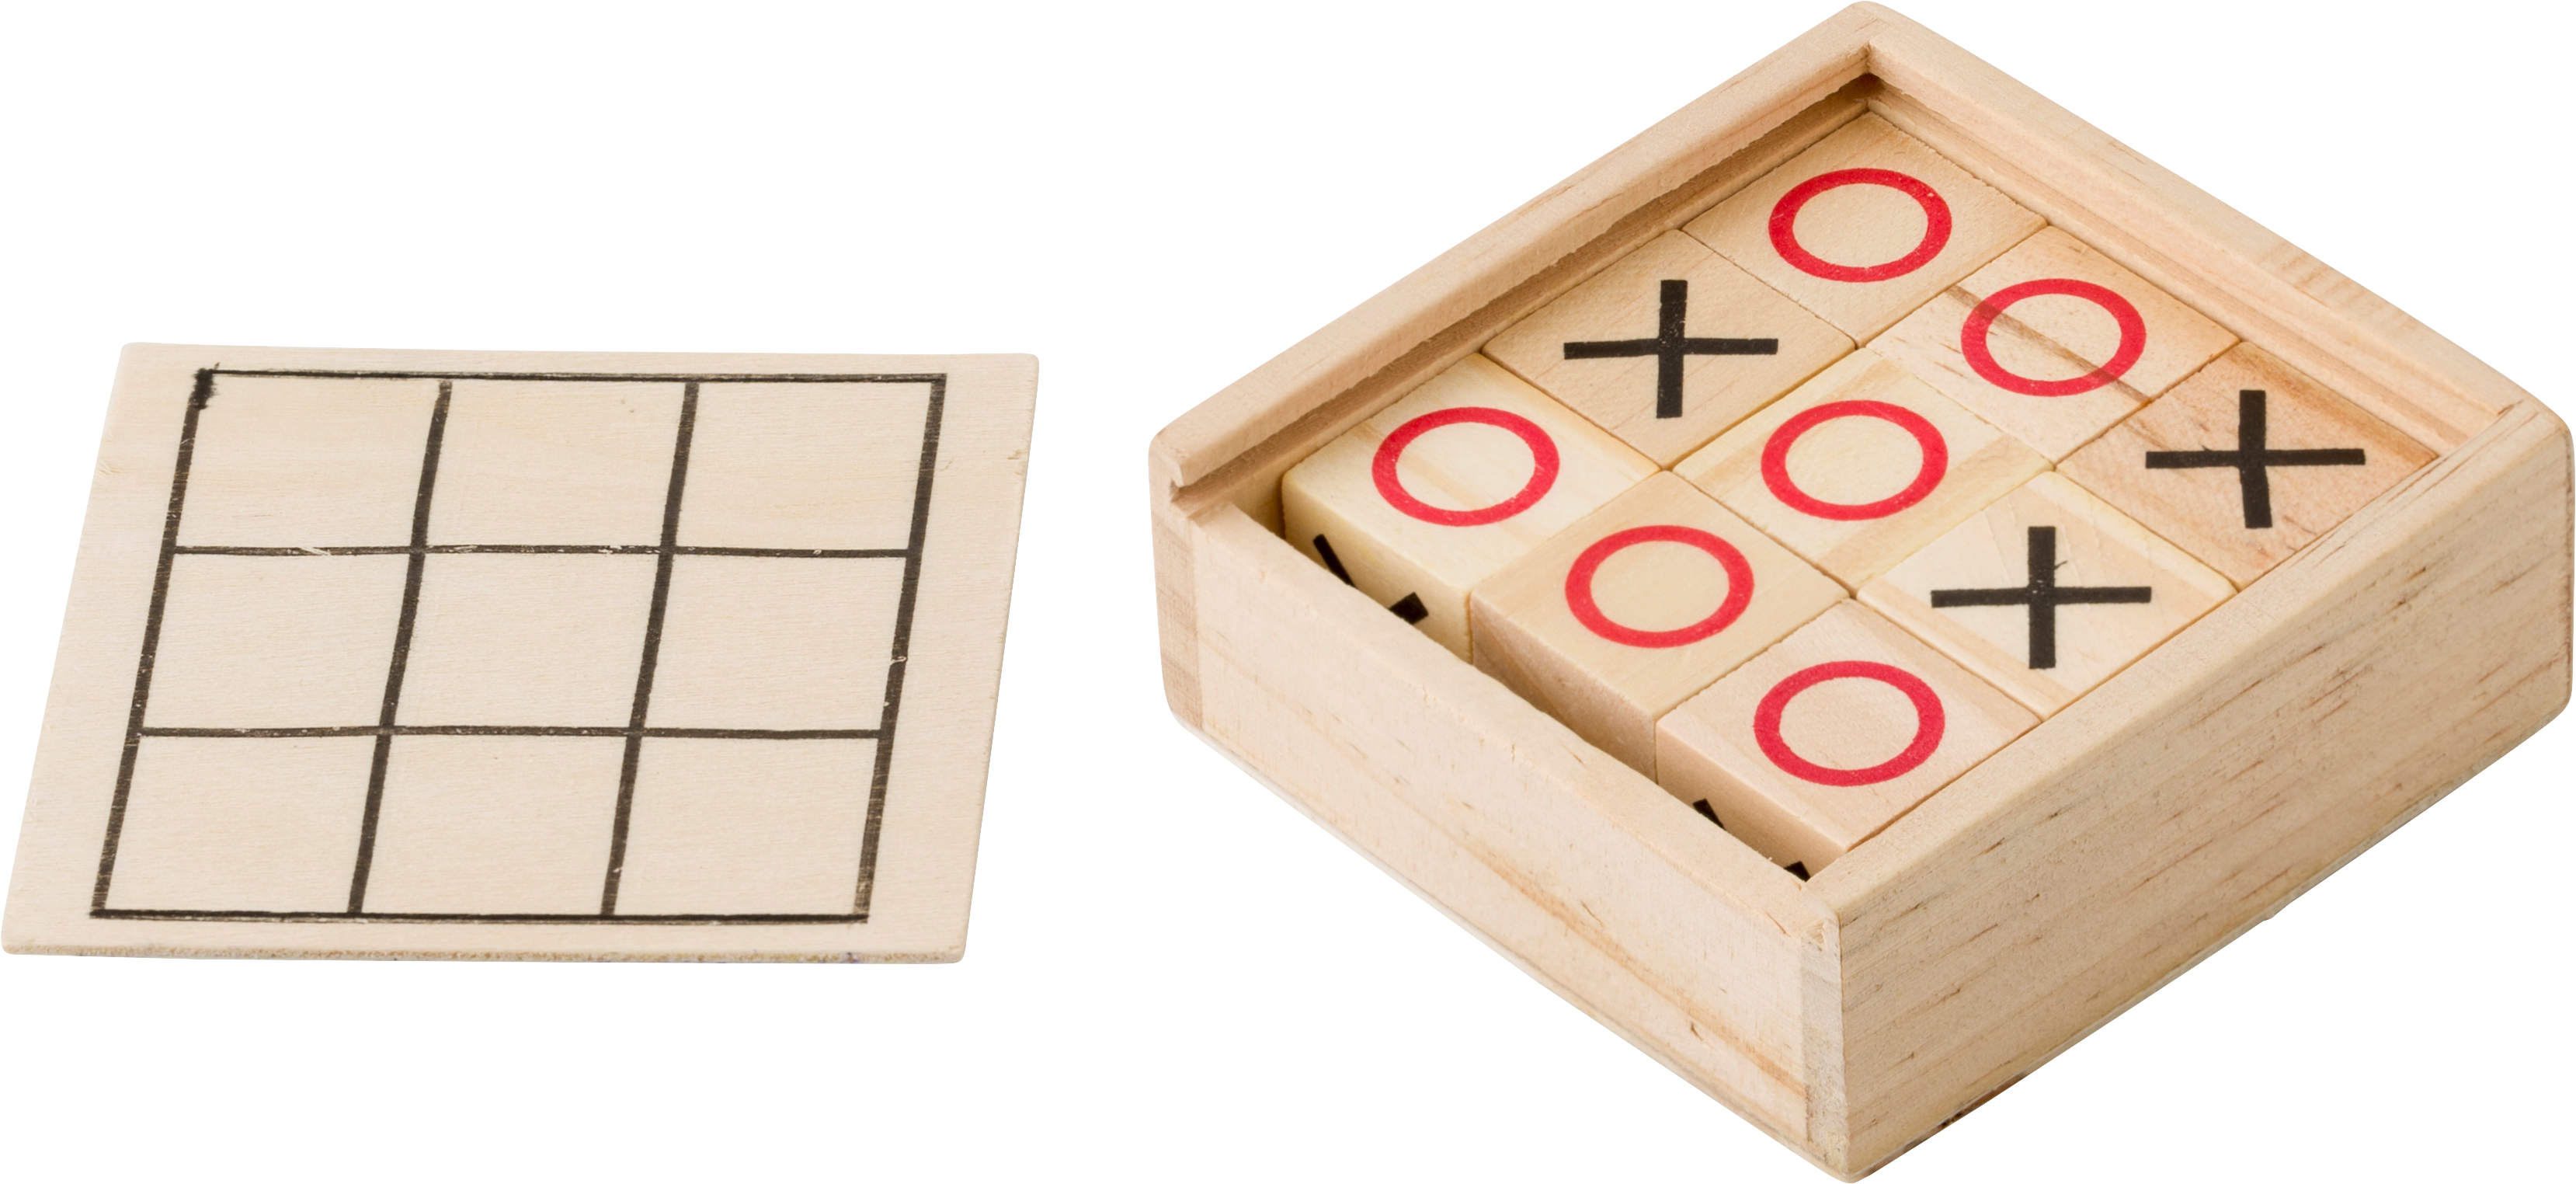  WE Games Tic-tac-Toe Wooden Board Game : Toys & Games